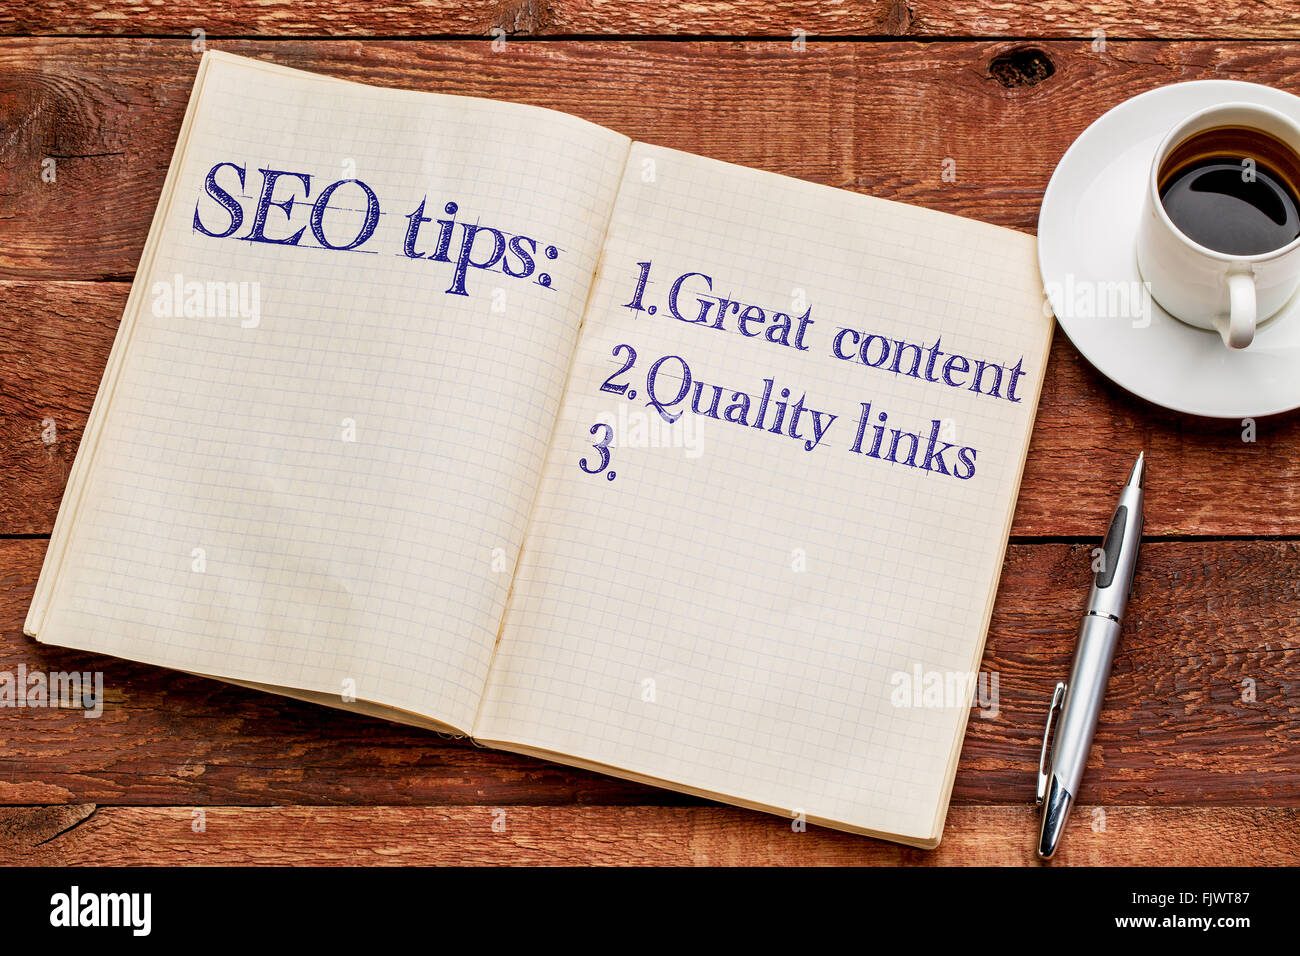 SEO (search engine optimization) tips (great content and quality links) in an old notebook with a cup of coffee Stock Photo